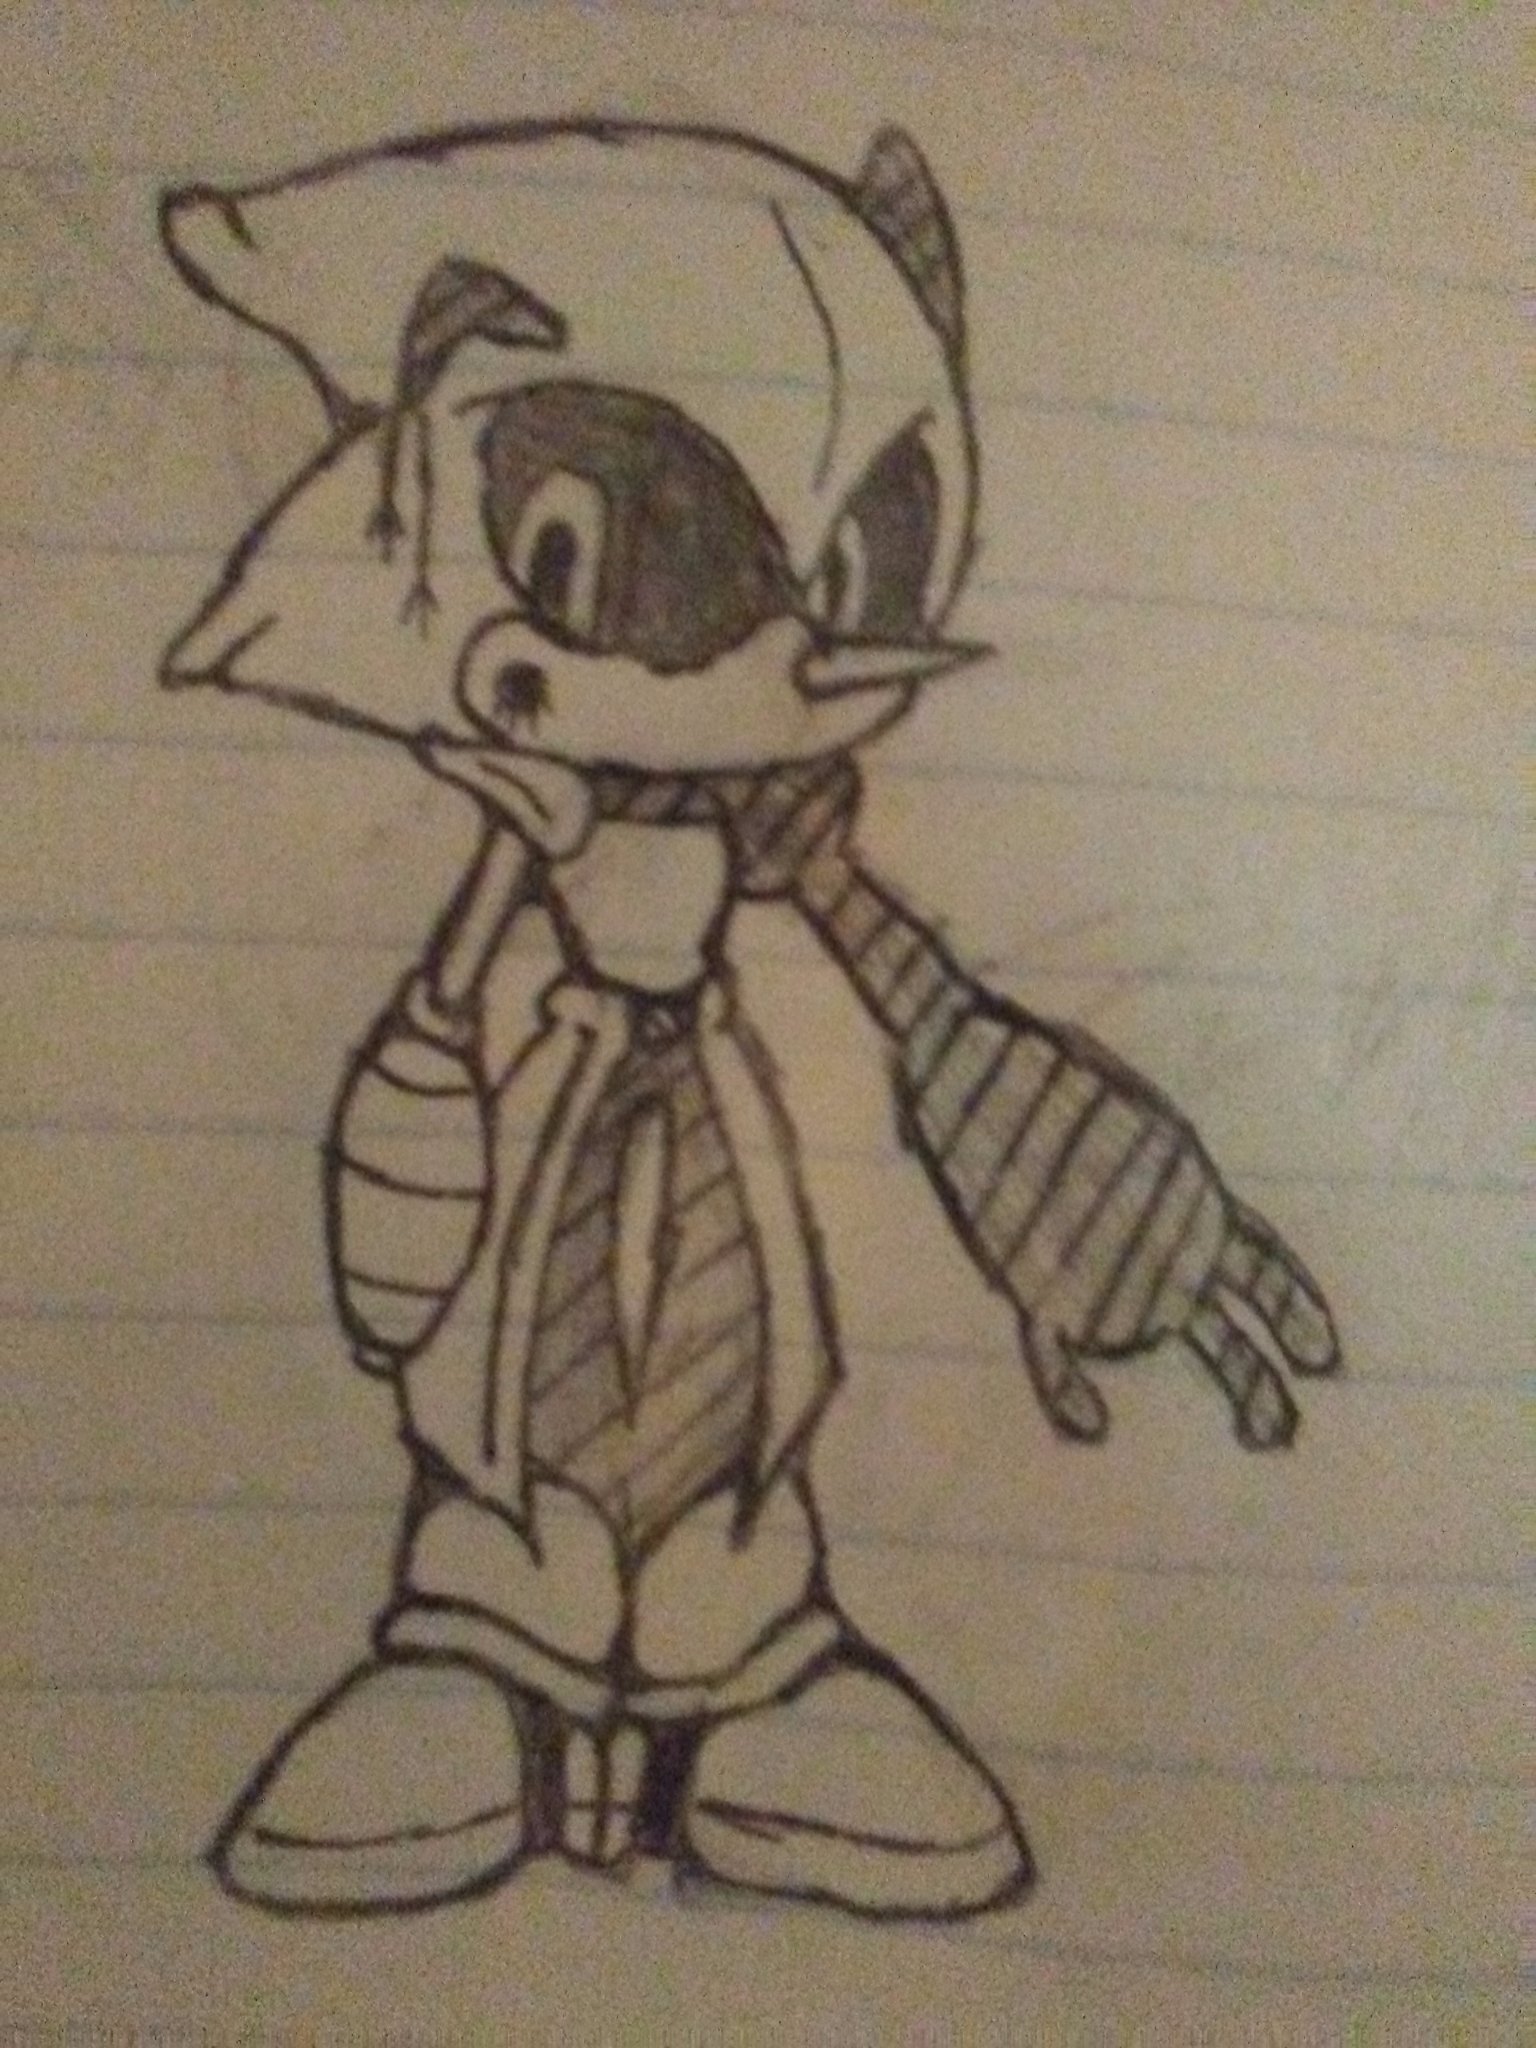 A universe hoping robot who's on a mission to destroy all parallel universe Sonics, and all who try to stop me.